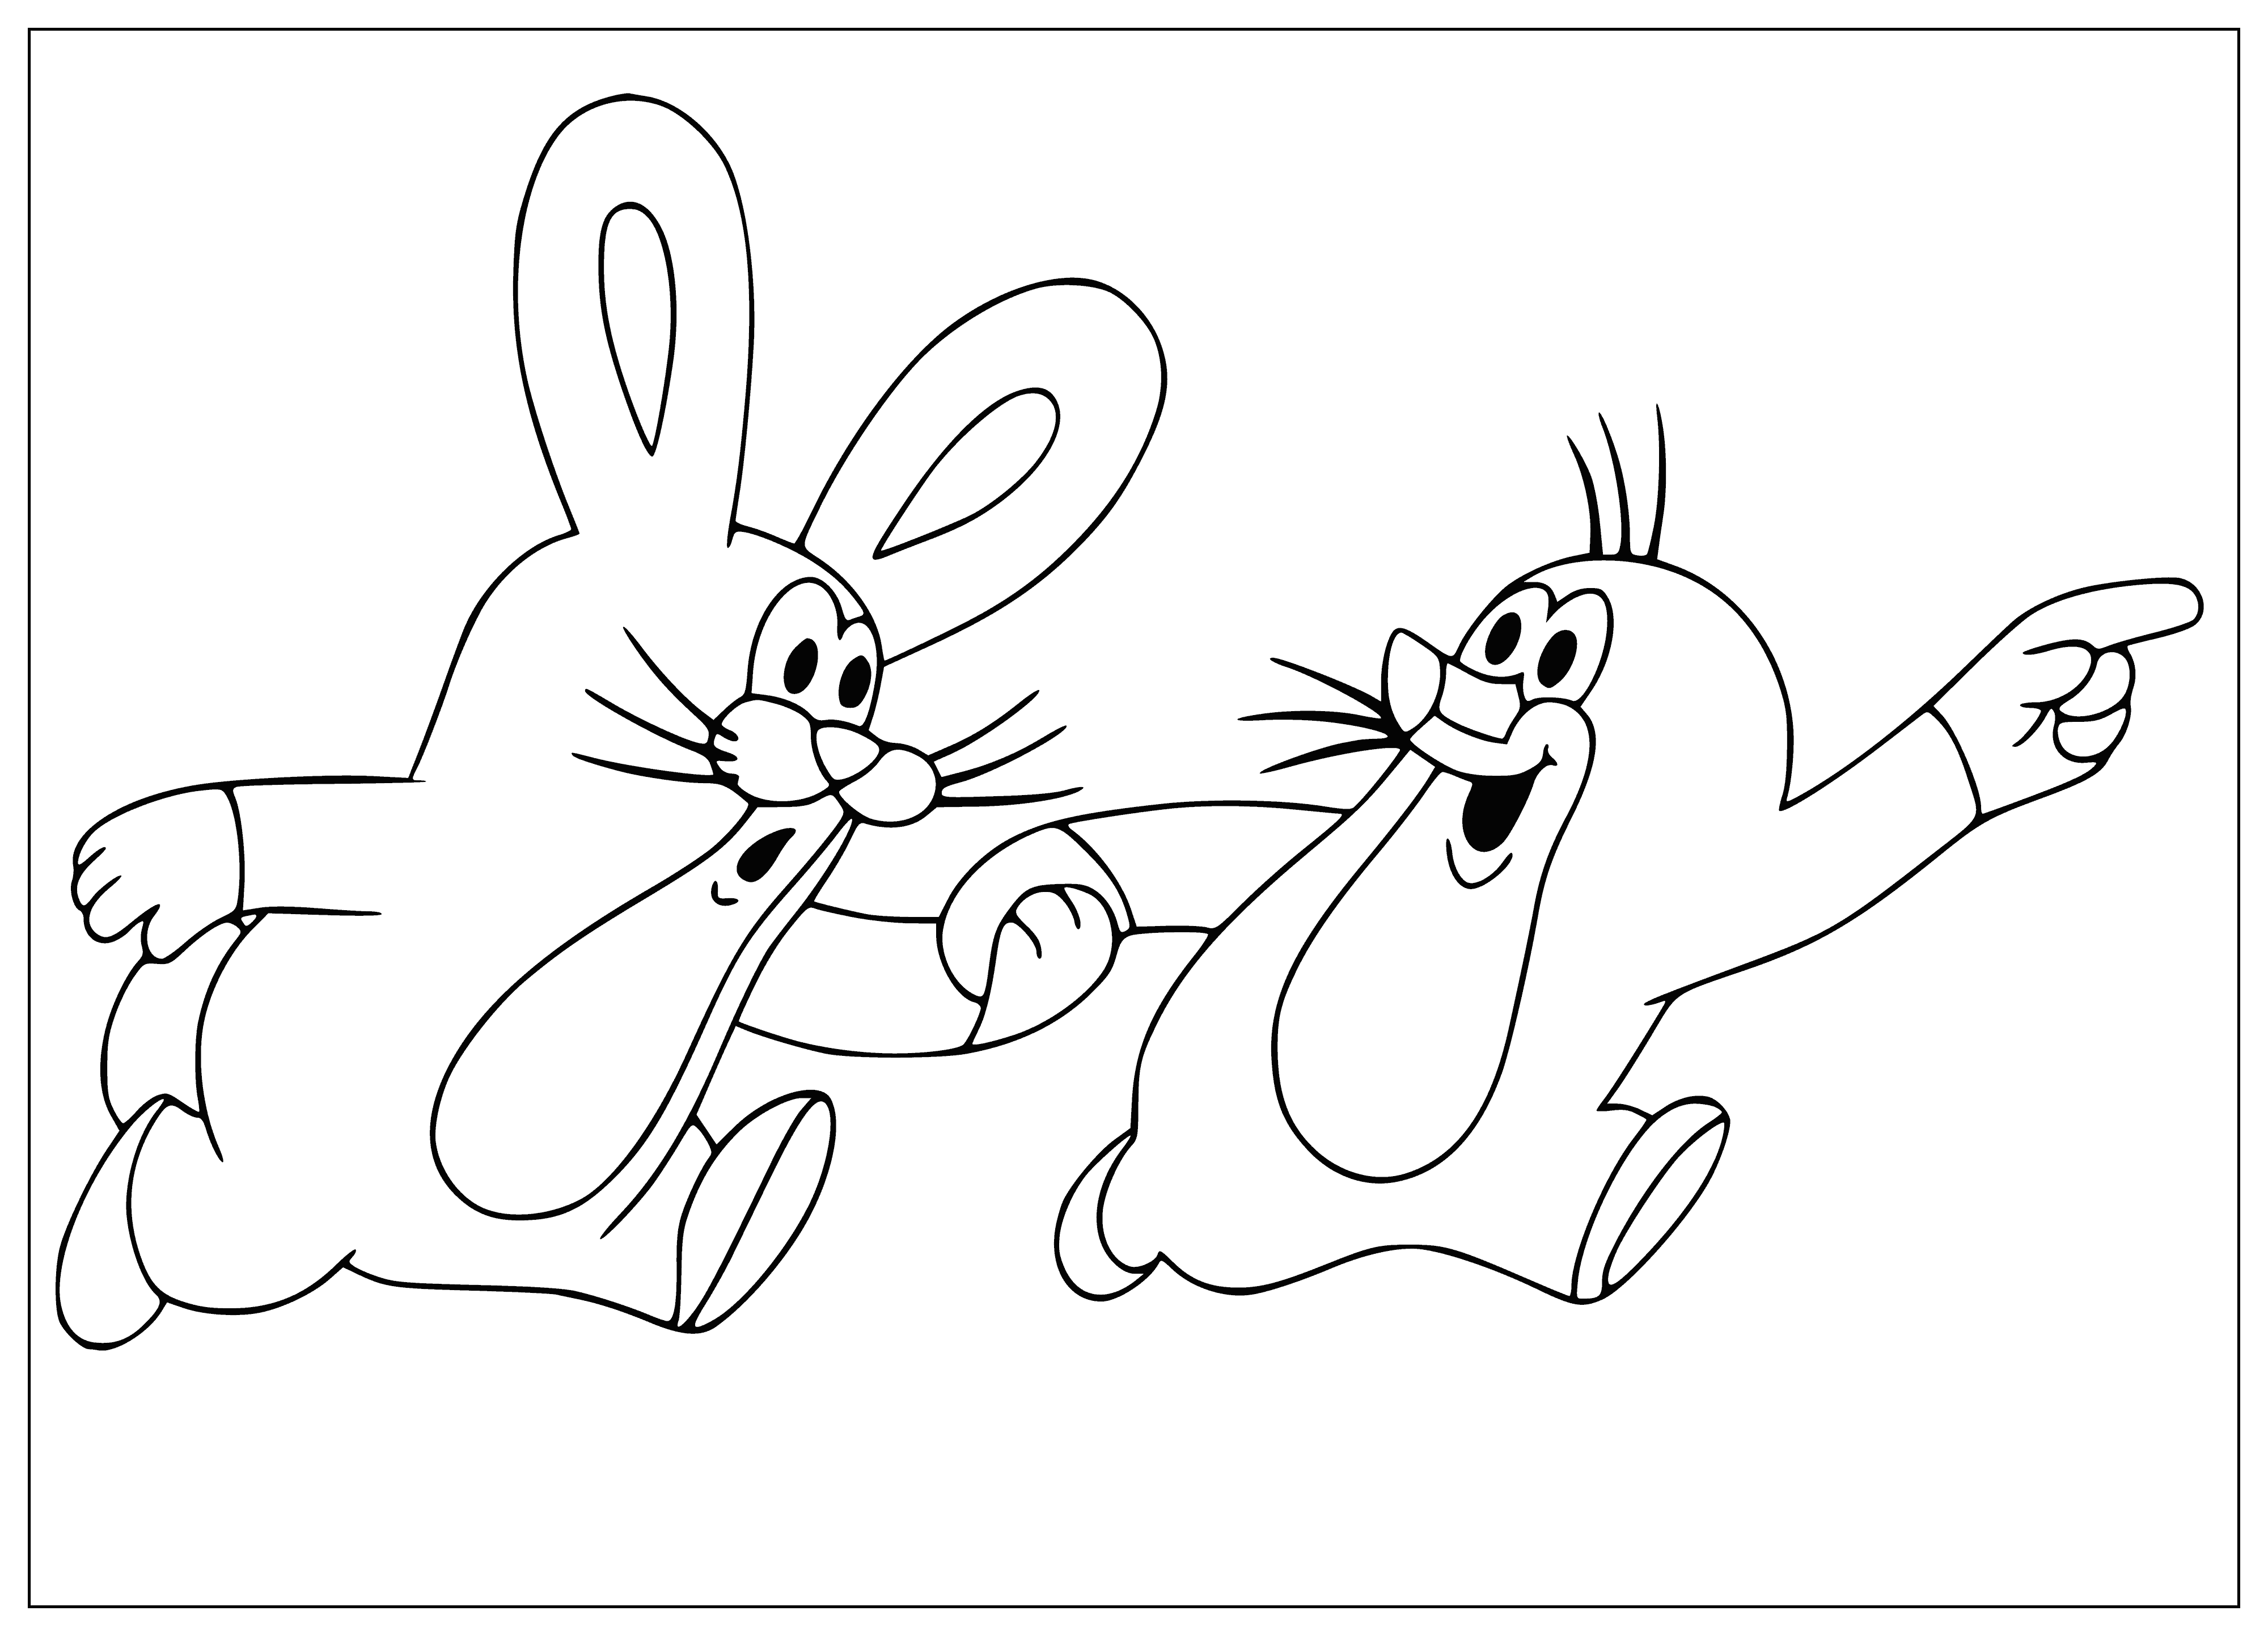 Hare and Mole coloring page